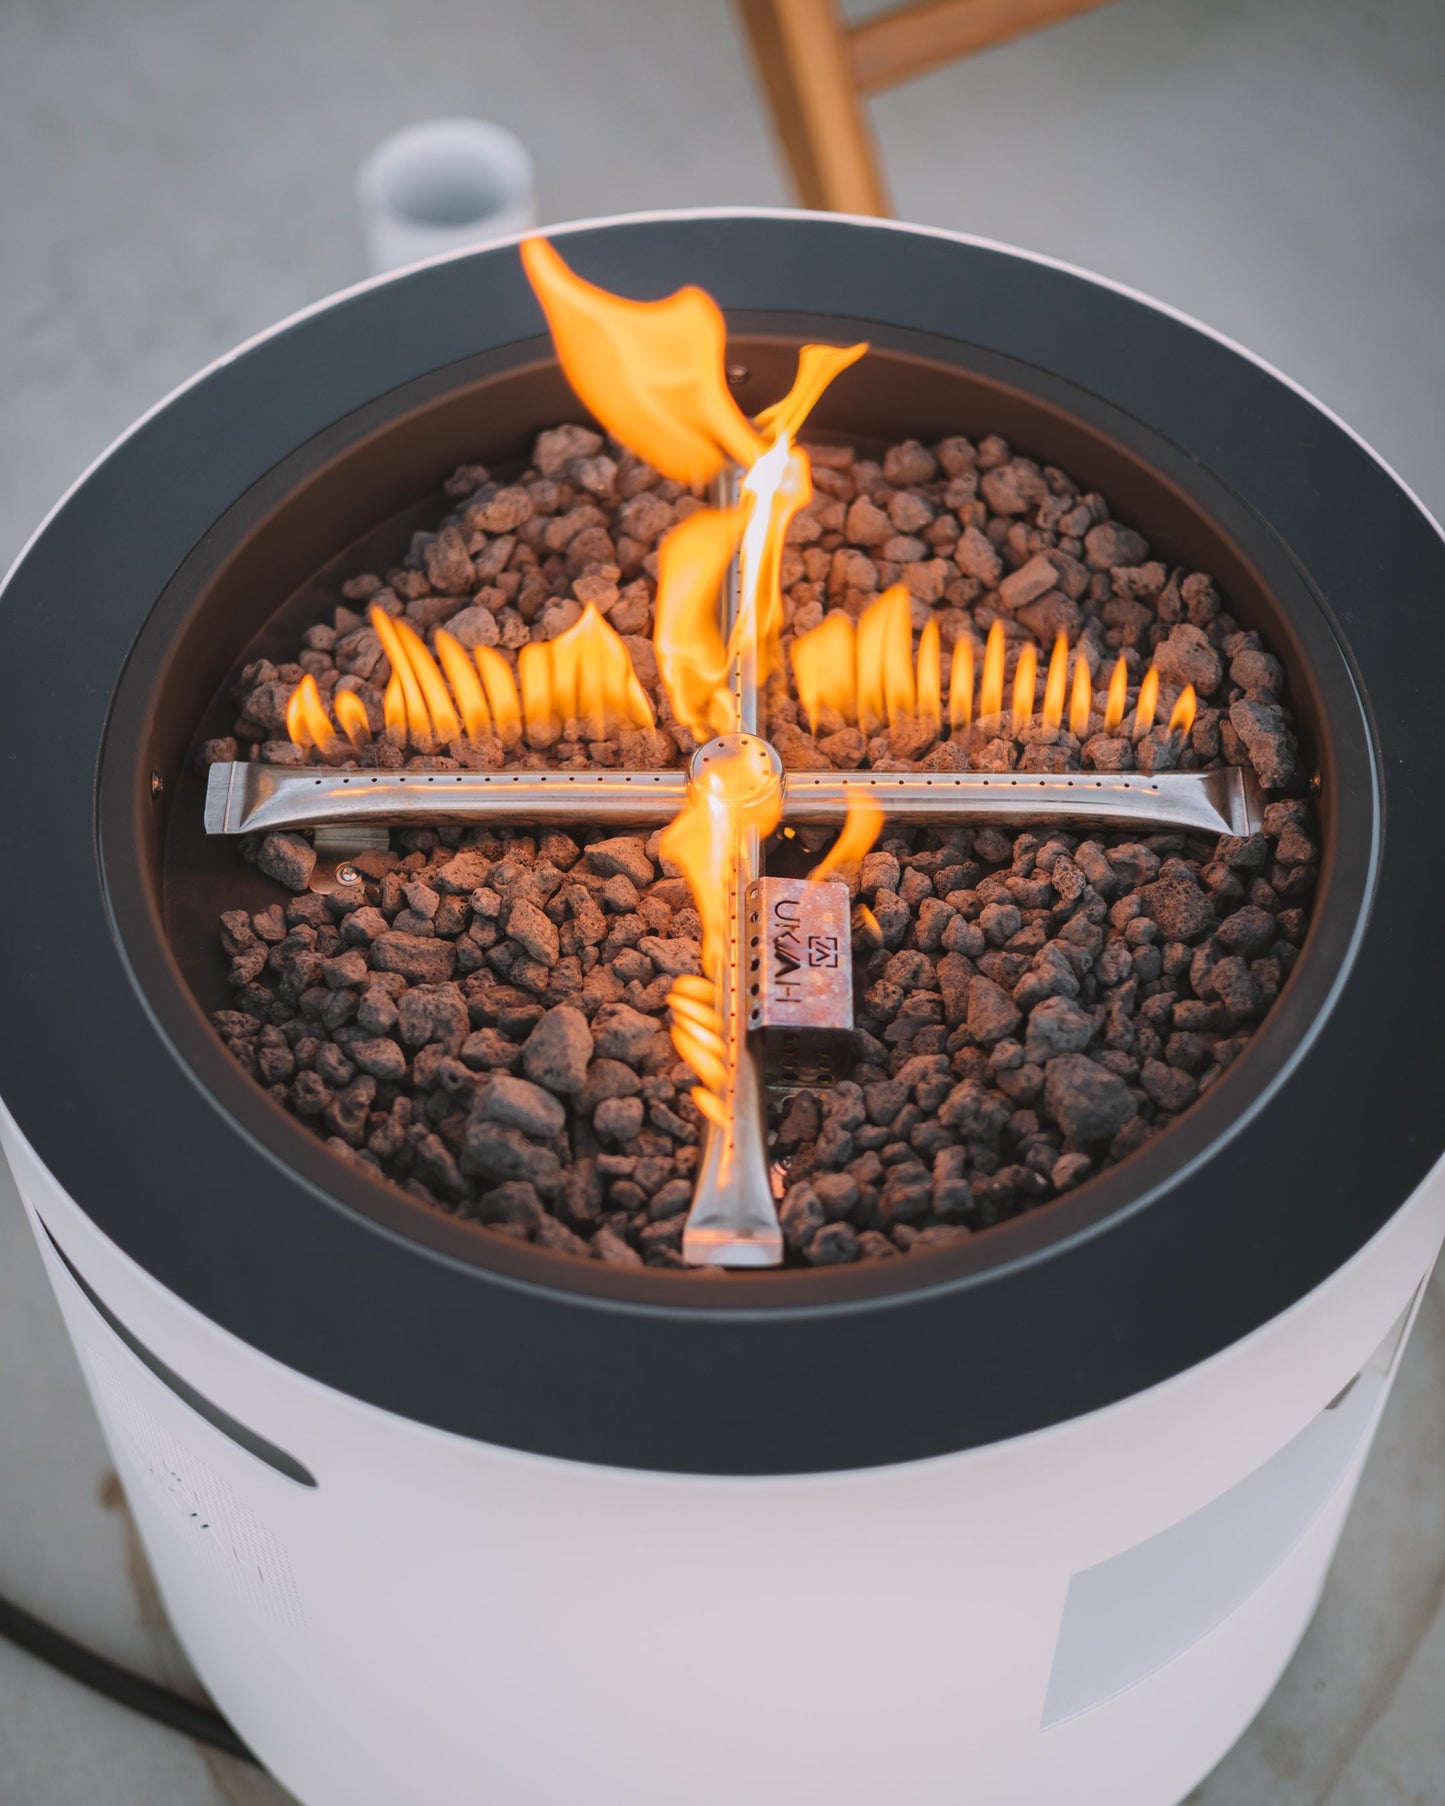 Ukiah Co. Home Bluetooth Fire Pit VOYAGER | Bluetooth Fire Pit | Ukiah Co.